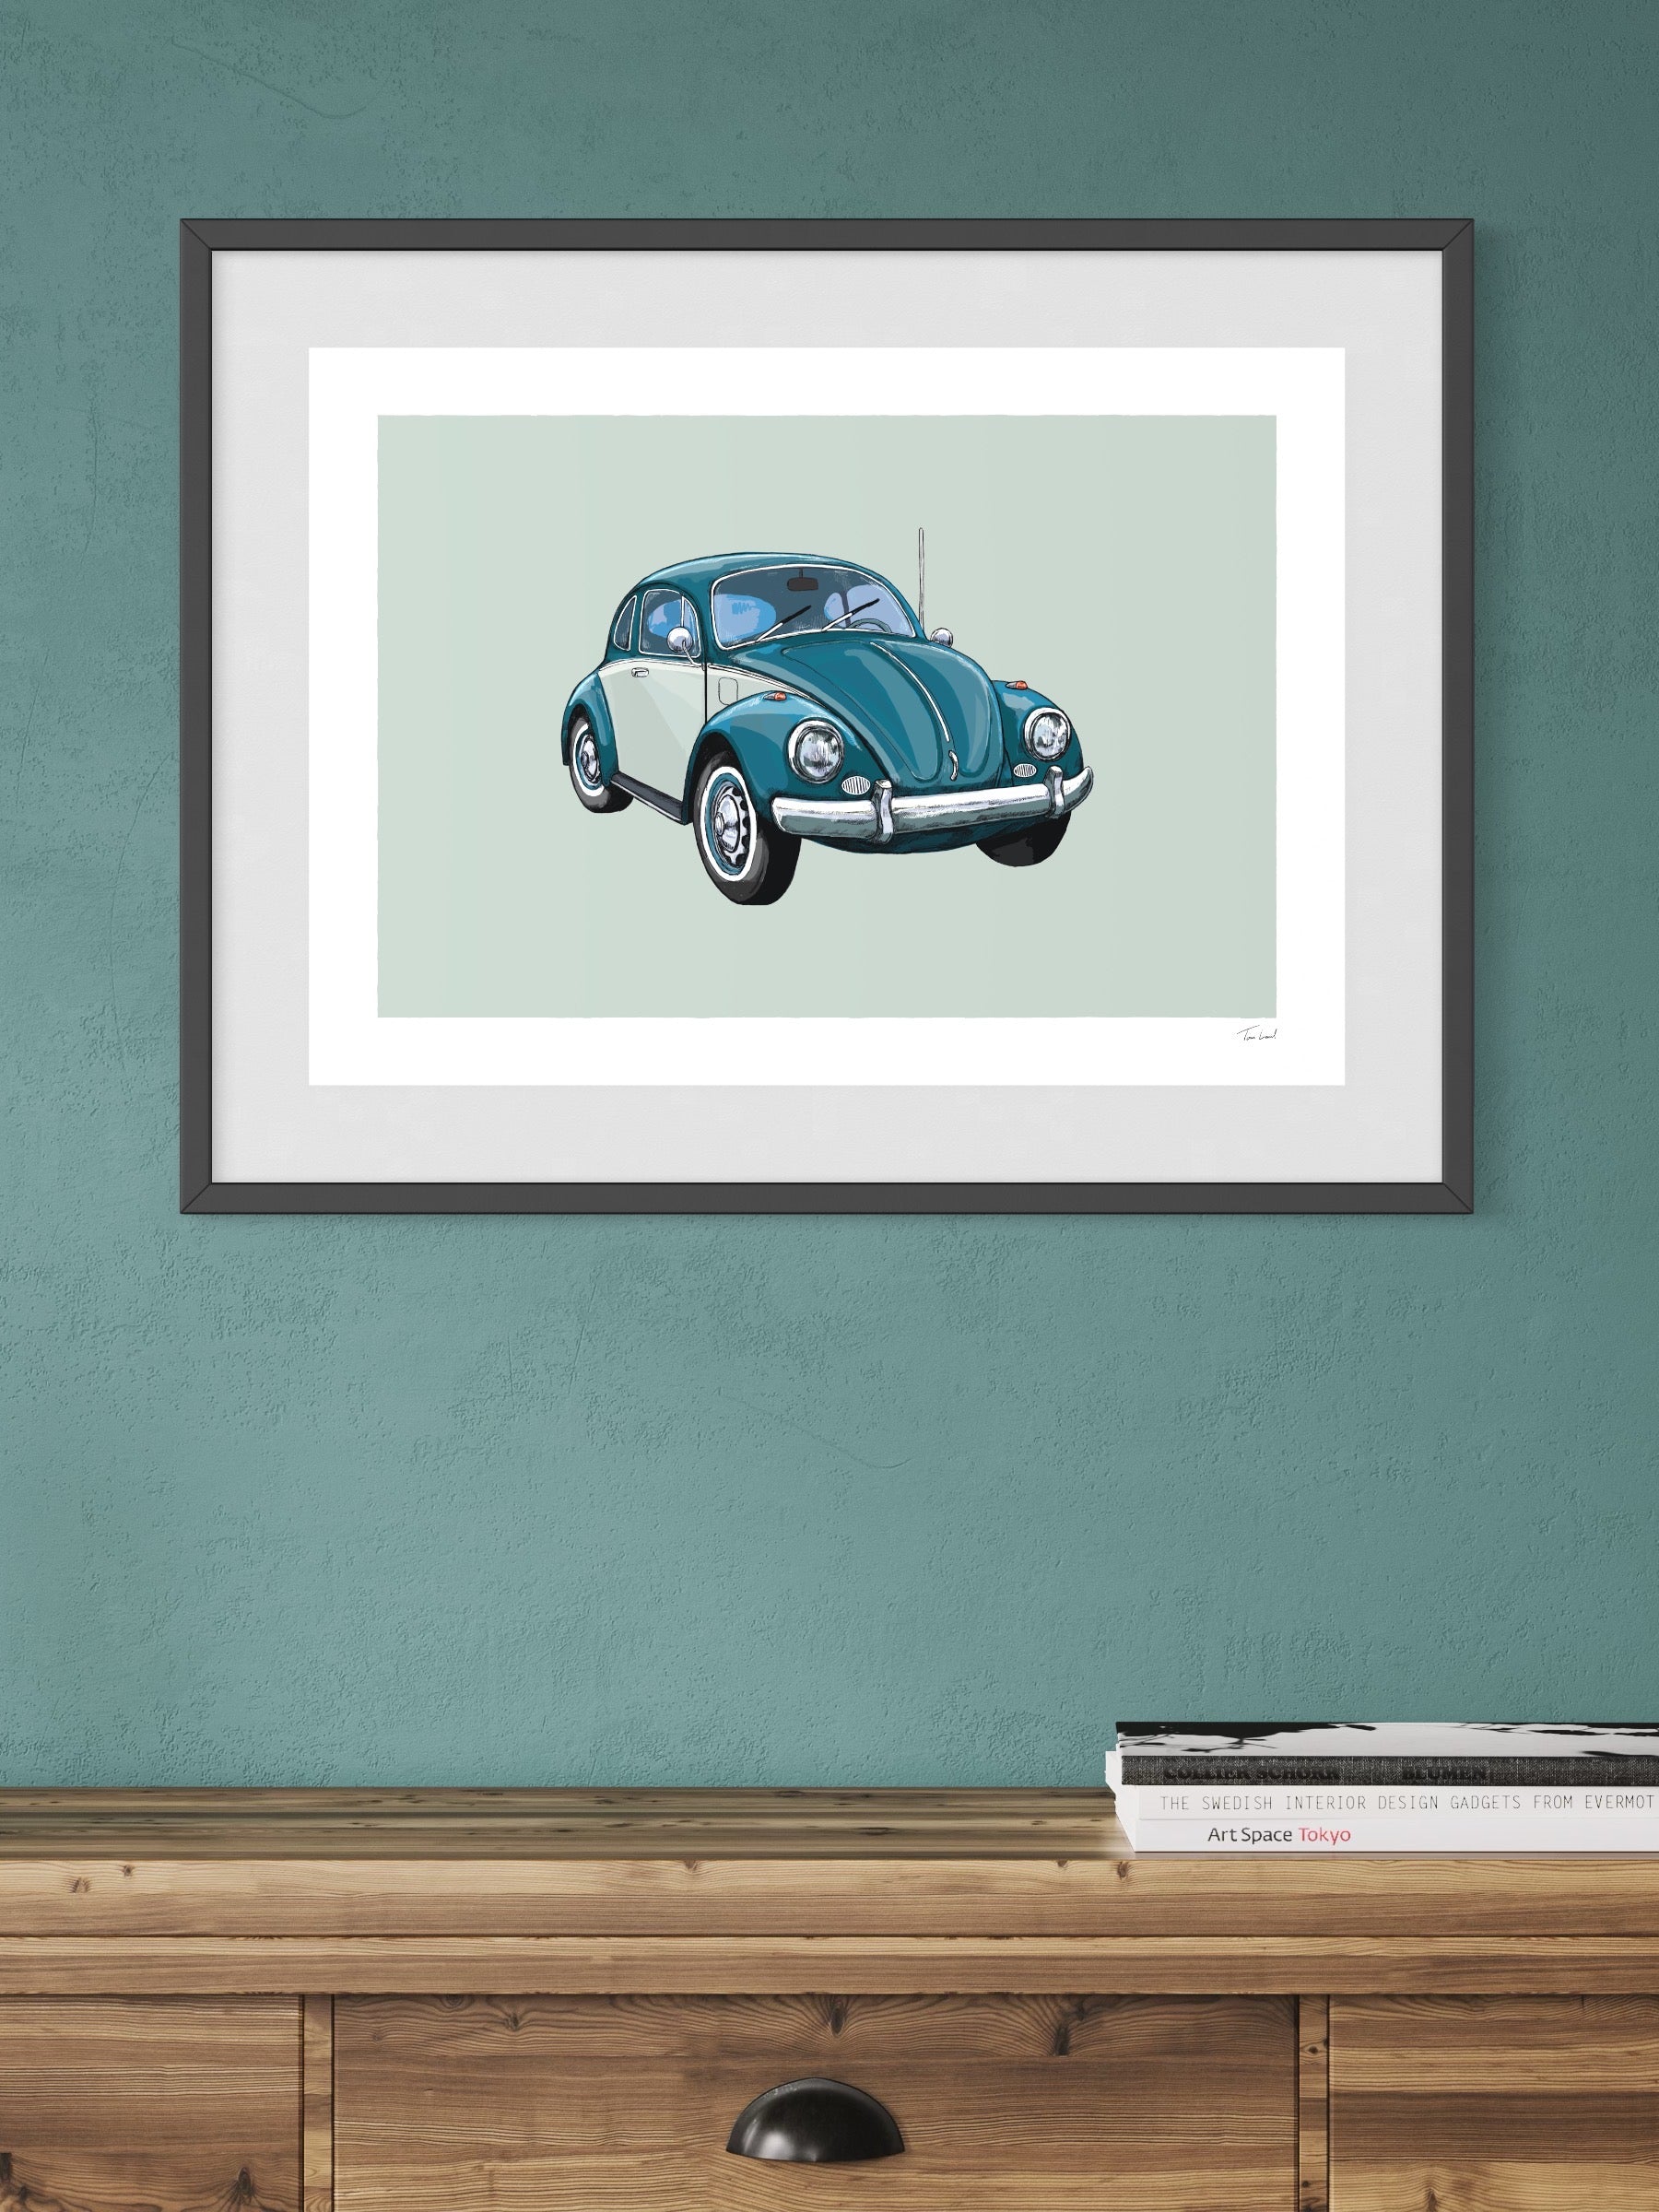 This image shows a giclee wall art print by Tom Laird Illustration of the German classic car, the Volkswagen Beetle, framed in a beautiful living room with tasteful modern home decor. This art print of a turquoise and cream example is available from Tom Laird Illustration in a variety of sizes.